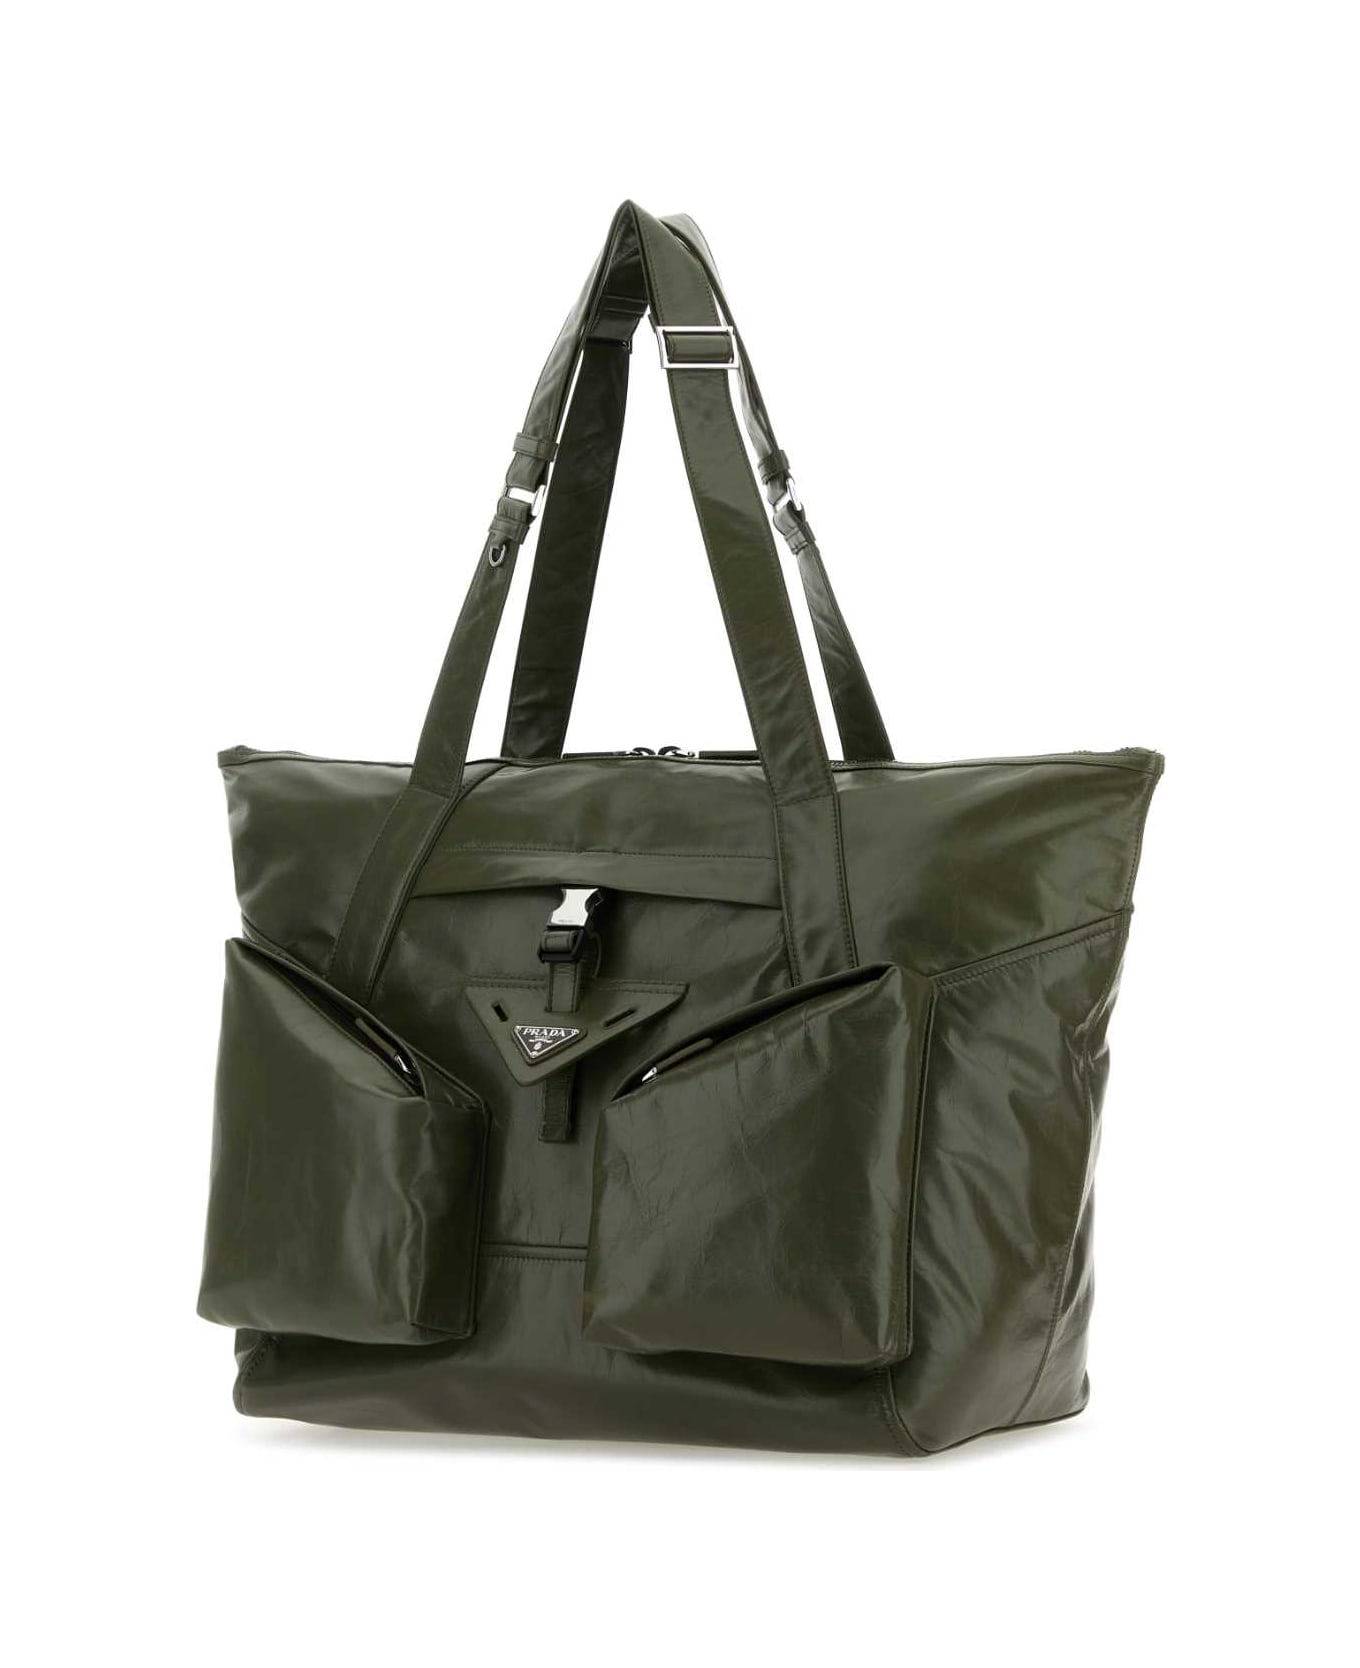 Prada Olive Green Leather Shopping Bag - LODEN